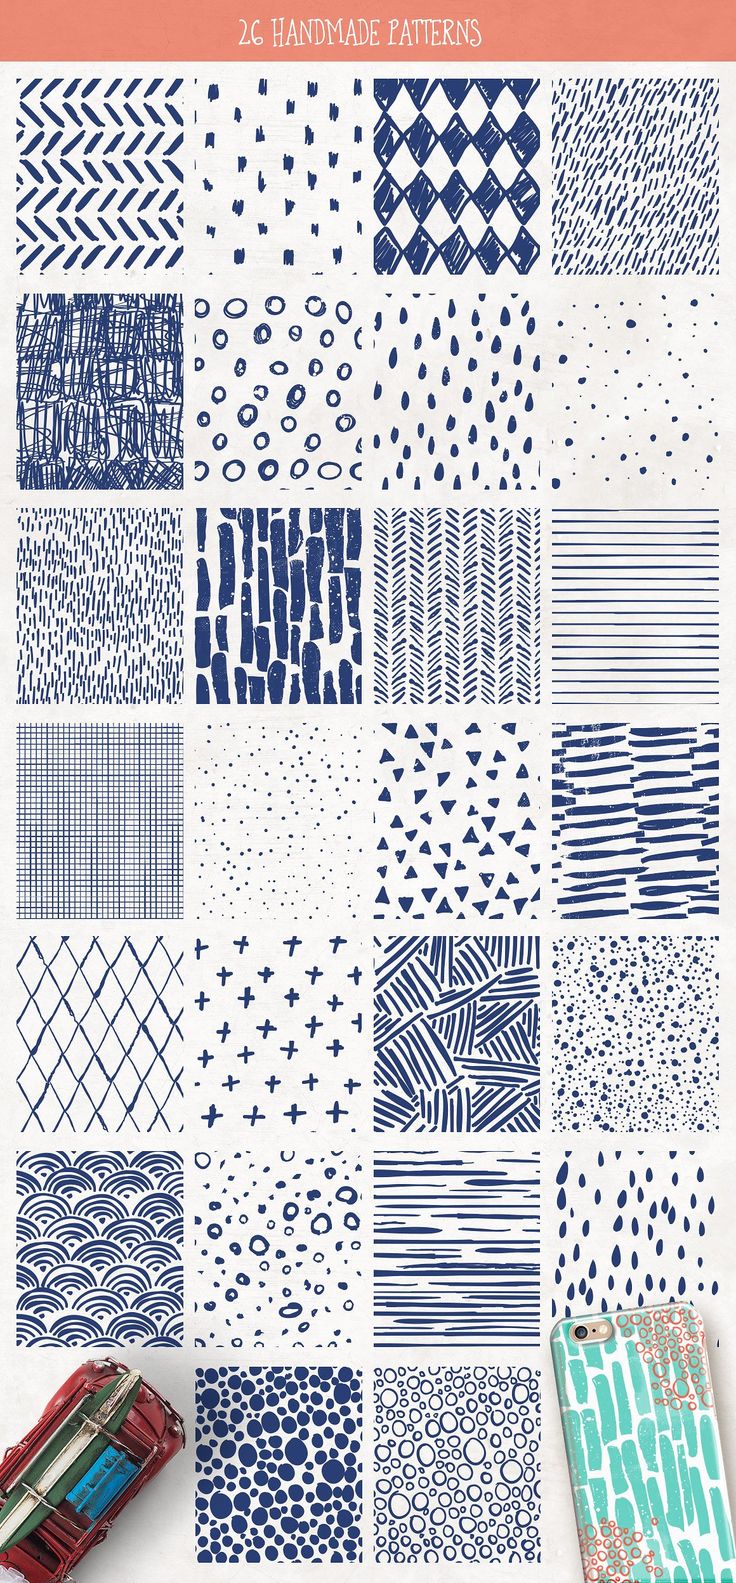 the blue and white patterns are featured in this graphic design book, which is also available for